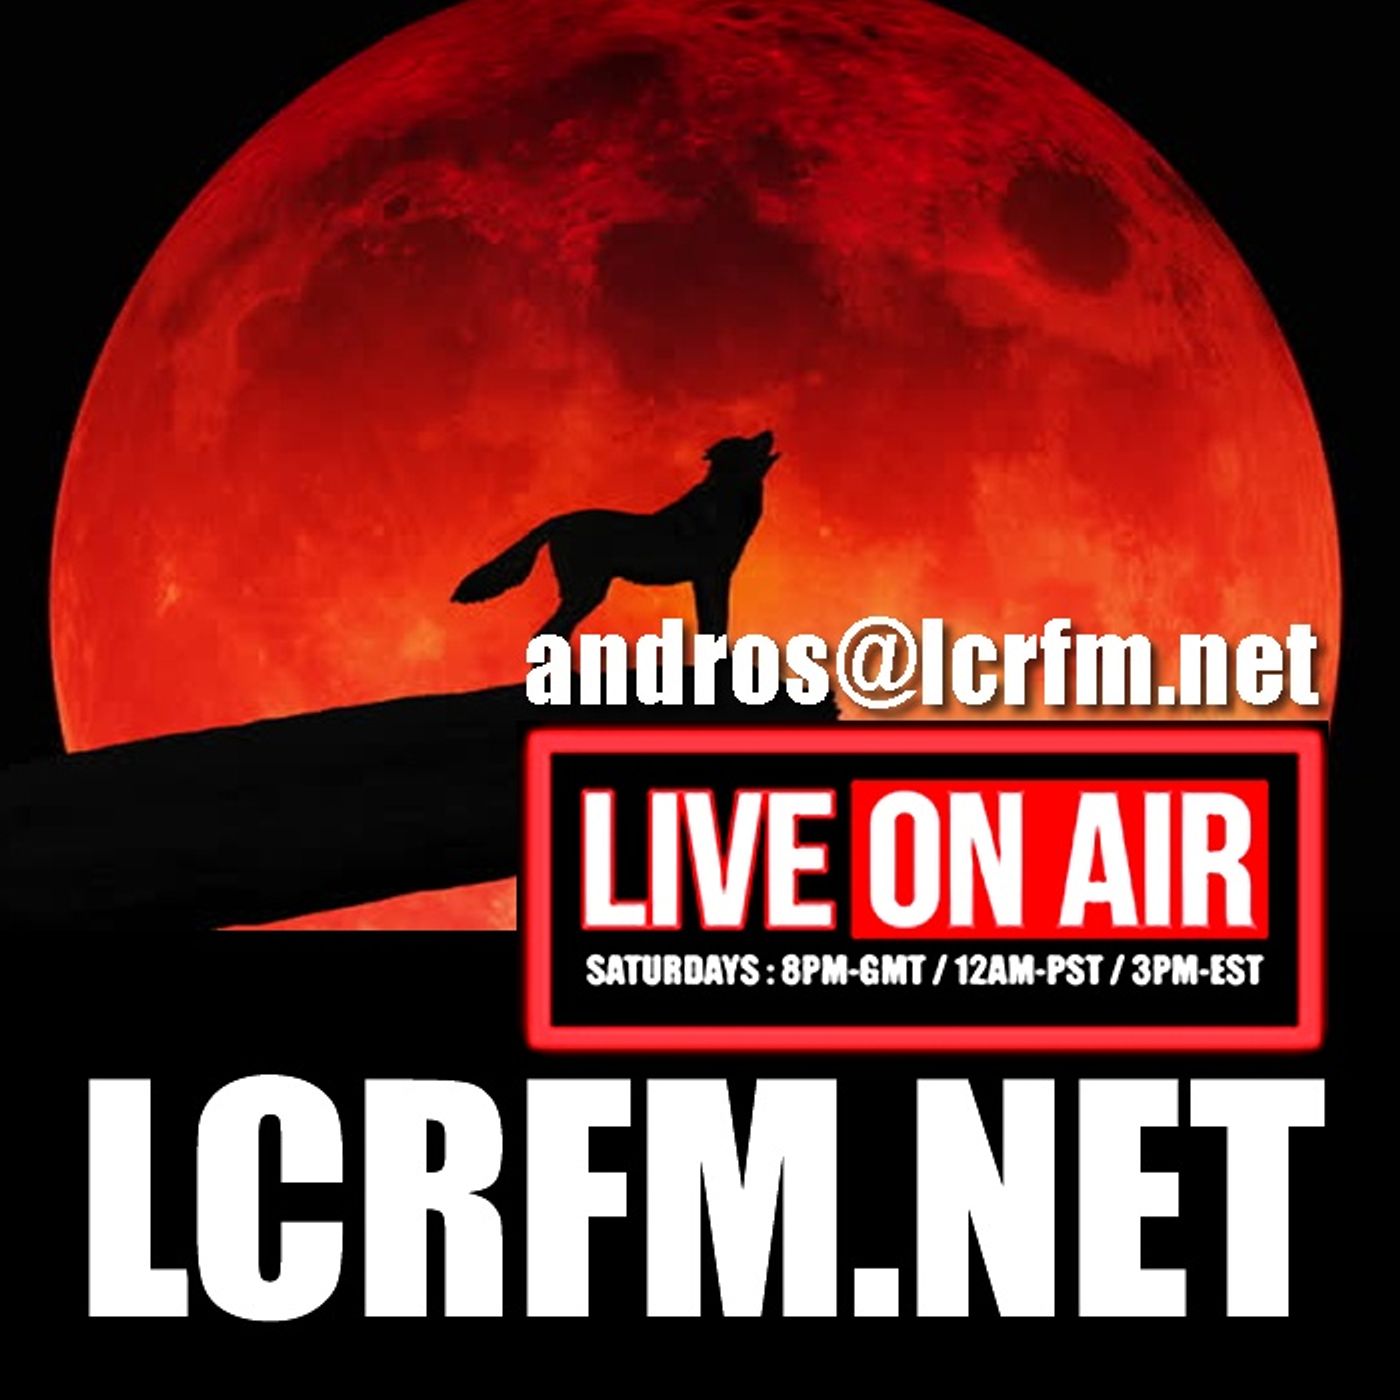 "Howling at the MOON"  LCRFM